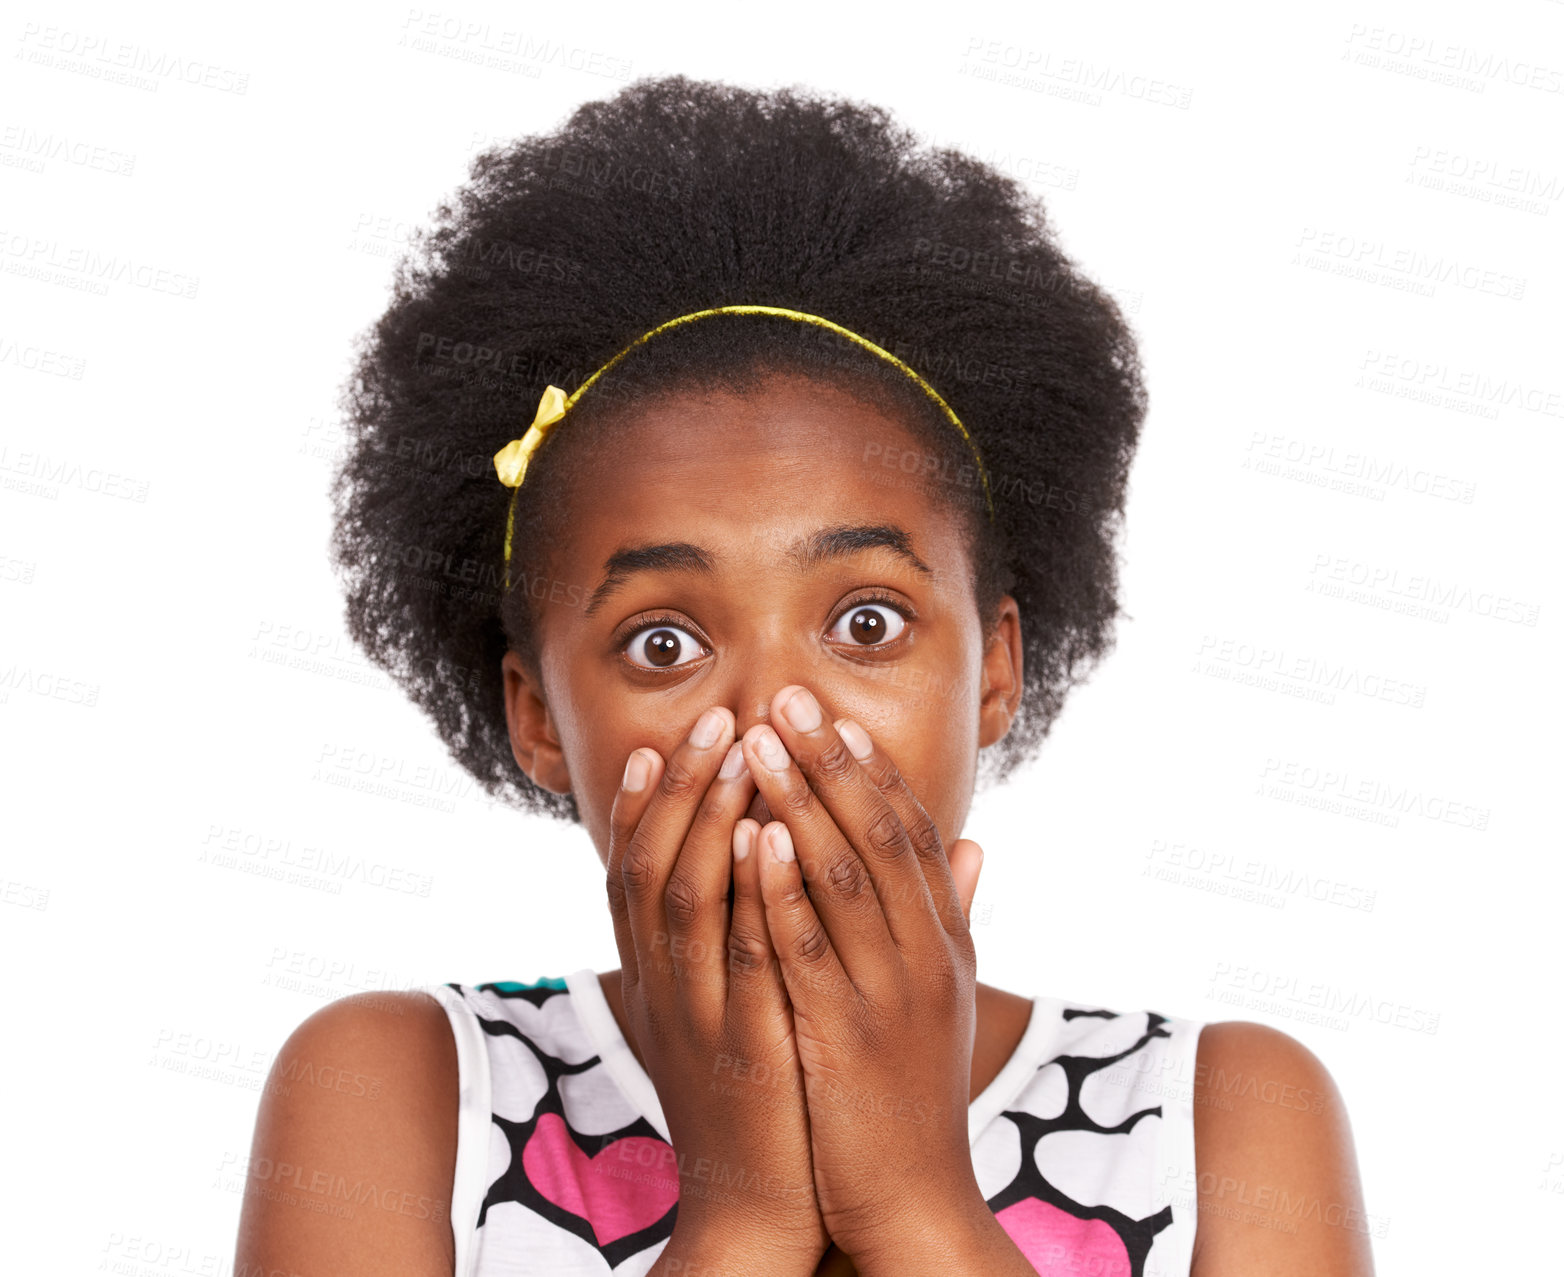 Buy stock photo Shock, portrait and young black girl in a studio with wow, wtf or omg facial expression for good news. Sweet, excited and headshot of African teenager with surprise face isolated by white background.